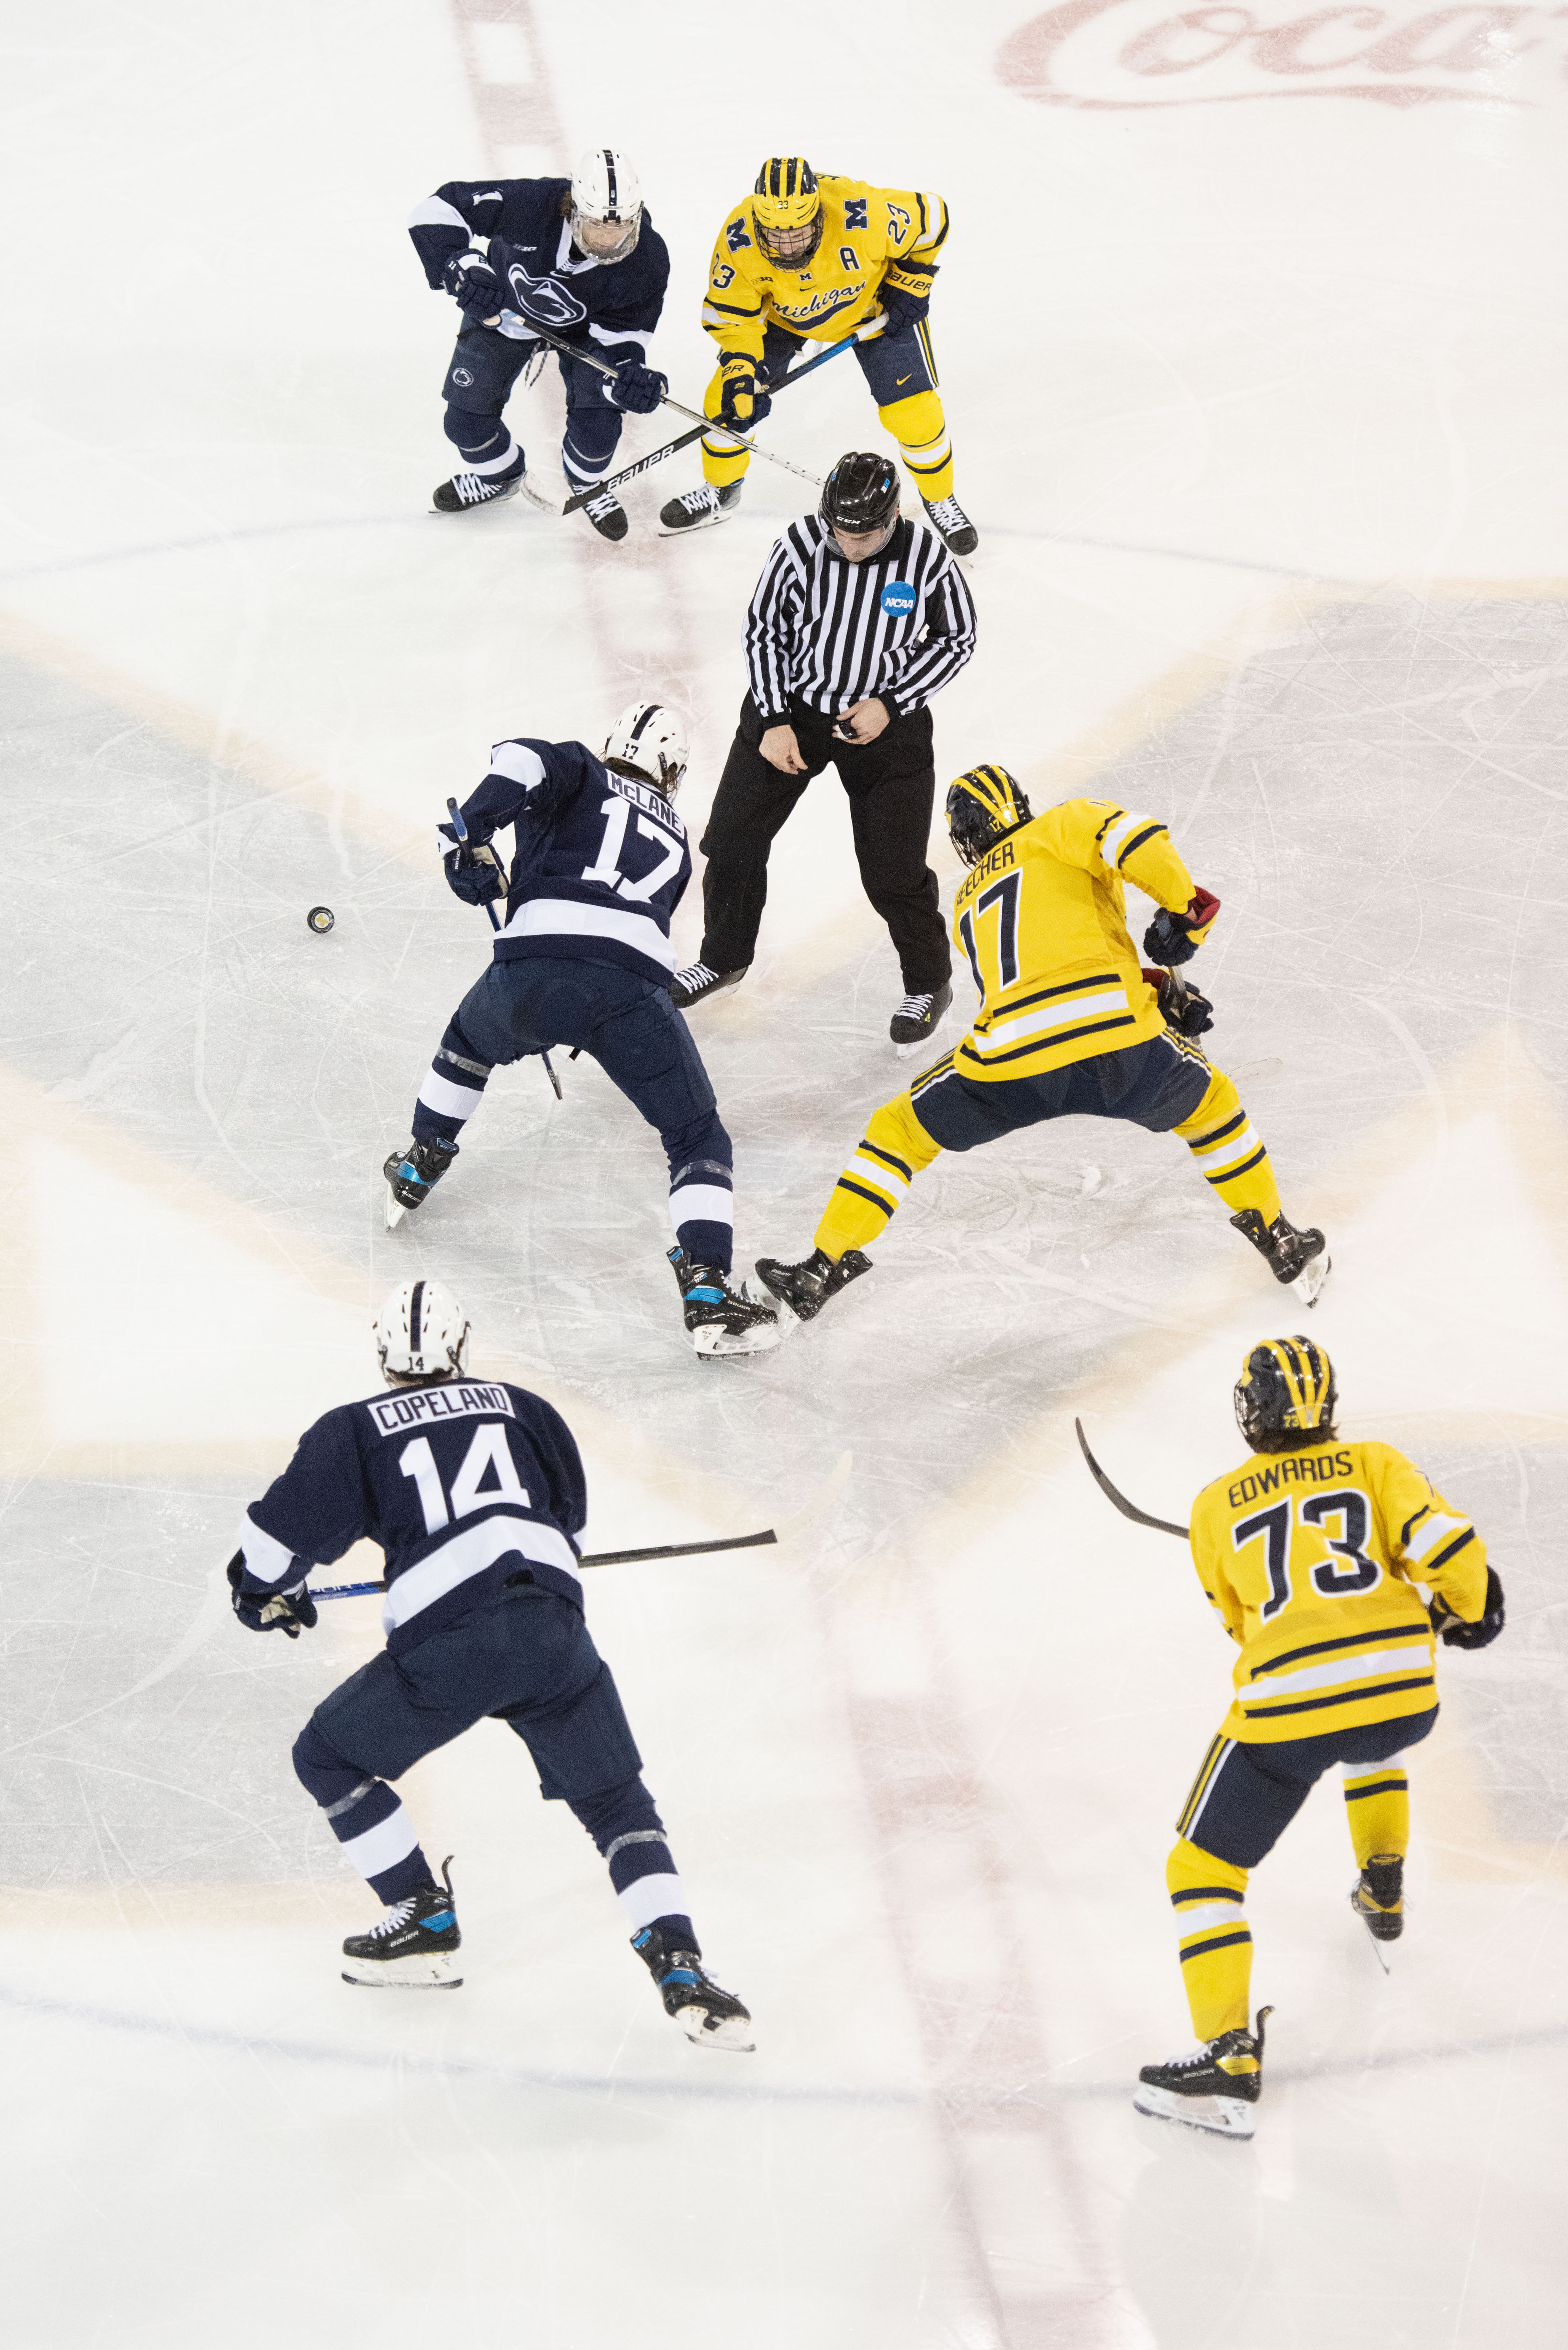 Michigan hockey overwhelmed, downed 3-0 by Penn State